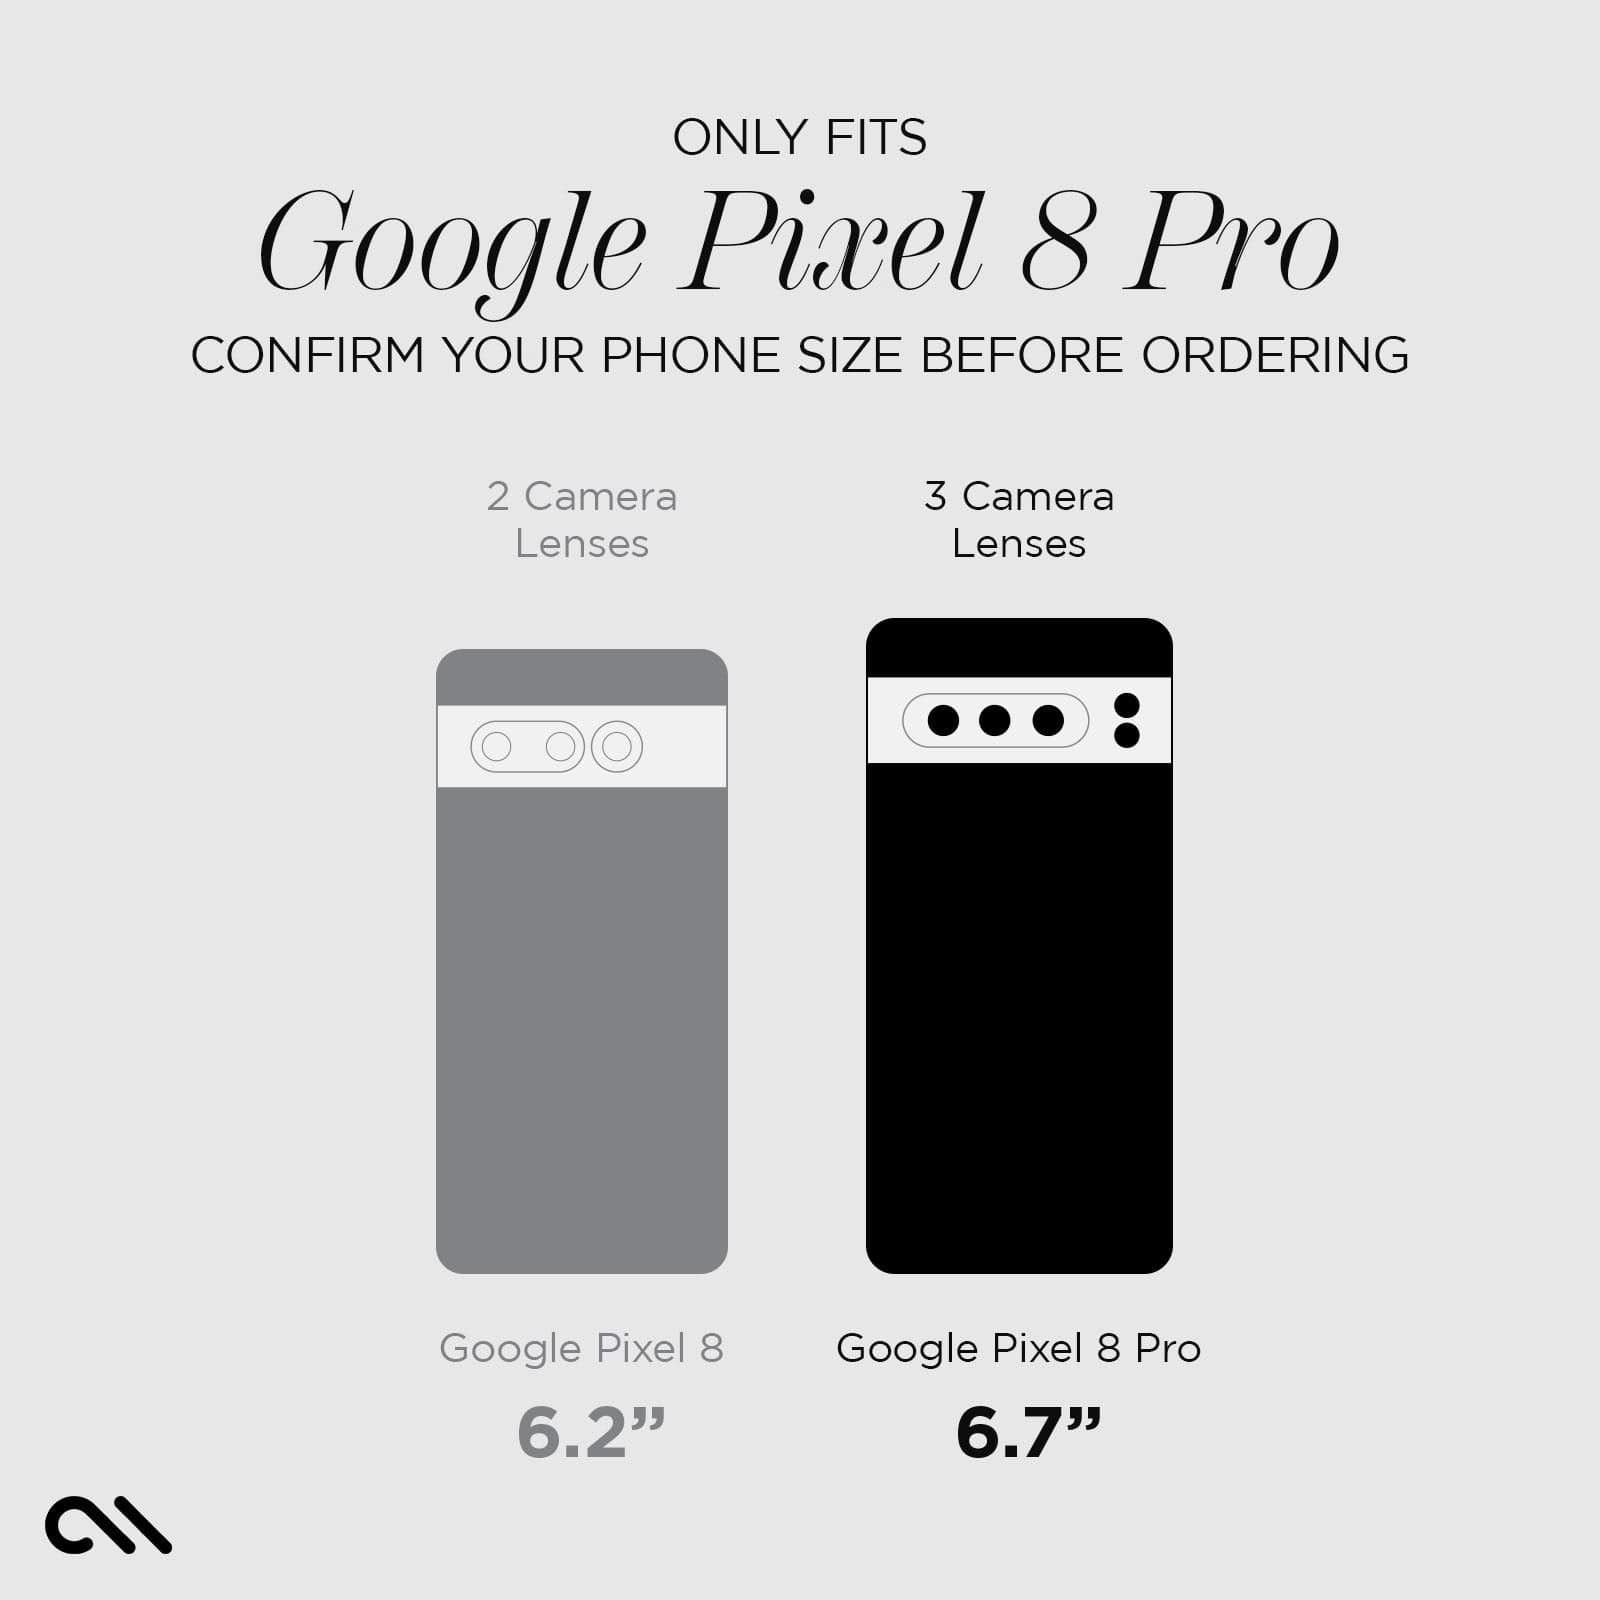 GOOGLE PIXEL 8 PRO. CONFIRM YOUR PHONE SIZE BEFORE ORDERING